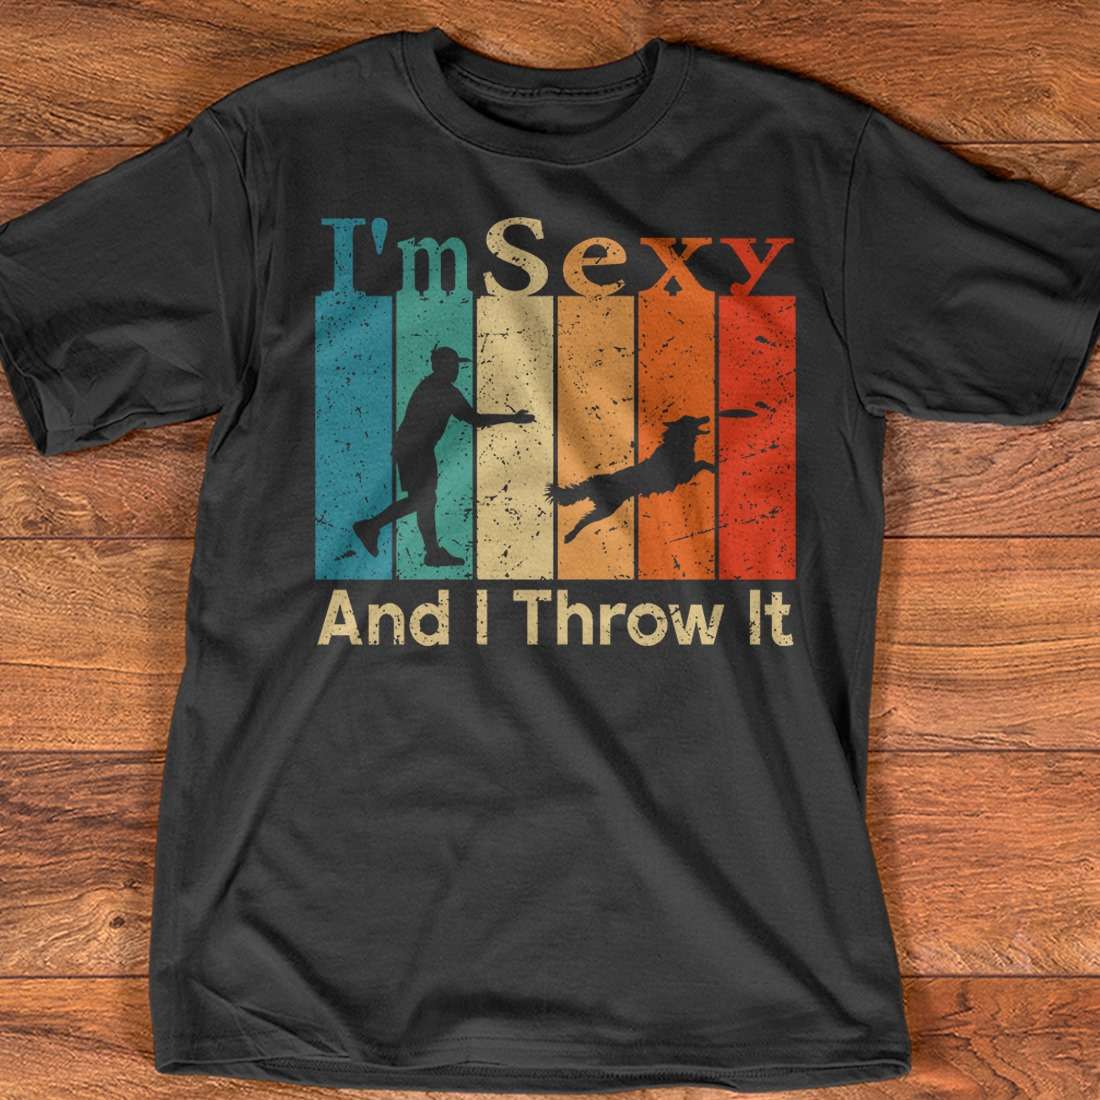 I'm sexy and I throw it - Dog lover gift, playing fetch with dog